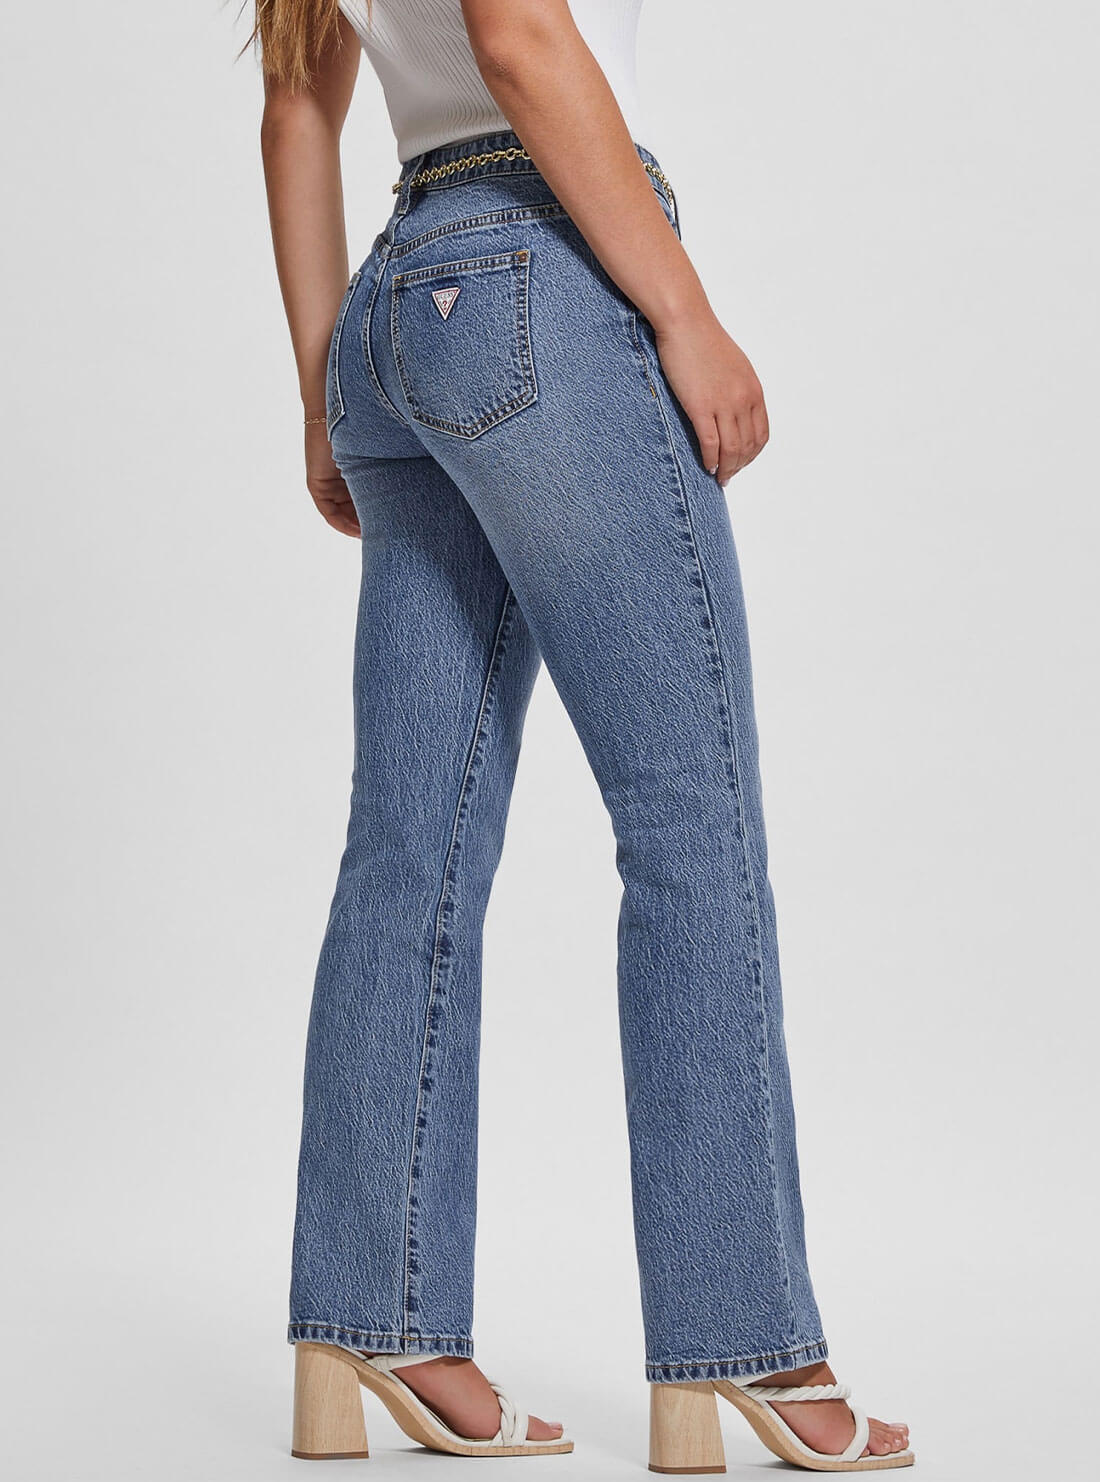 Mid-Rise G-Belt Sexy Straight Leg Denim Jeans In Lunar Blue Wash | GUESS Women's Apparel | side view